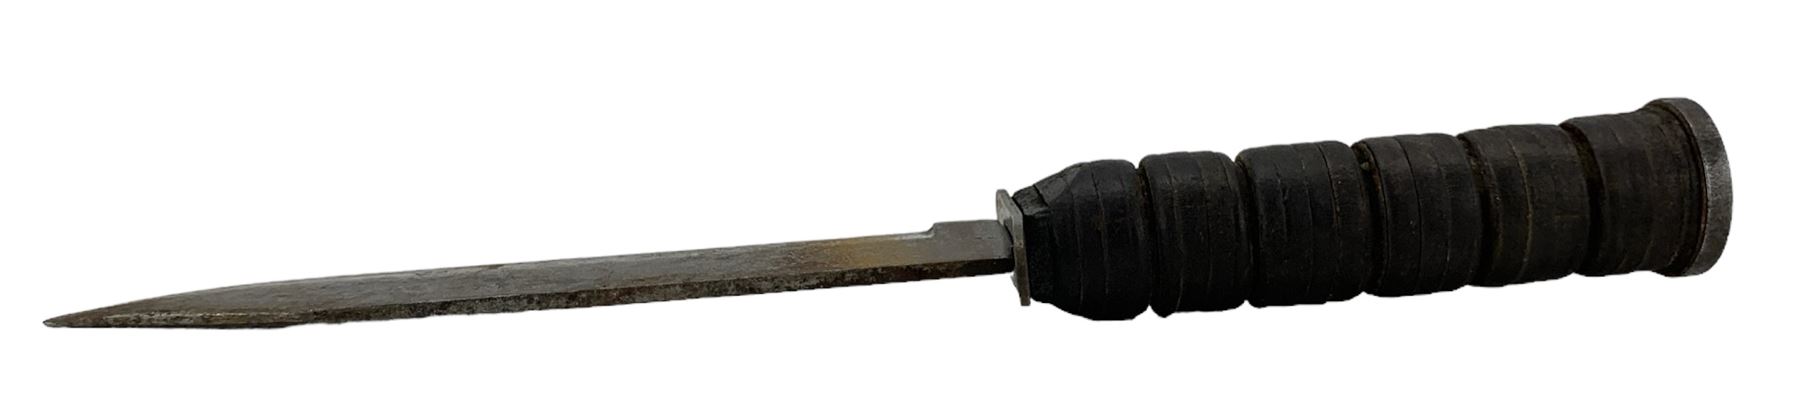 American Second World War fighting knife with 17cm blade - Image 3 of 3